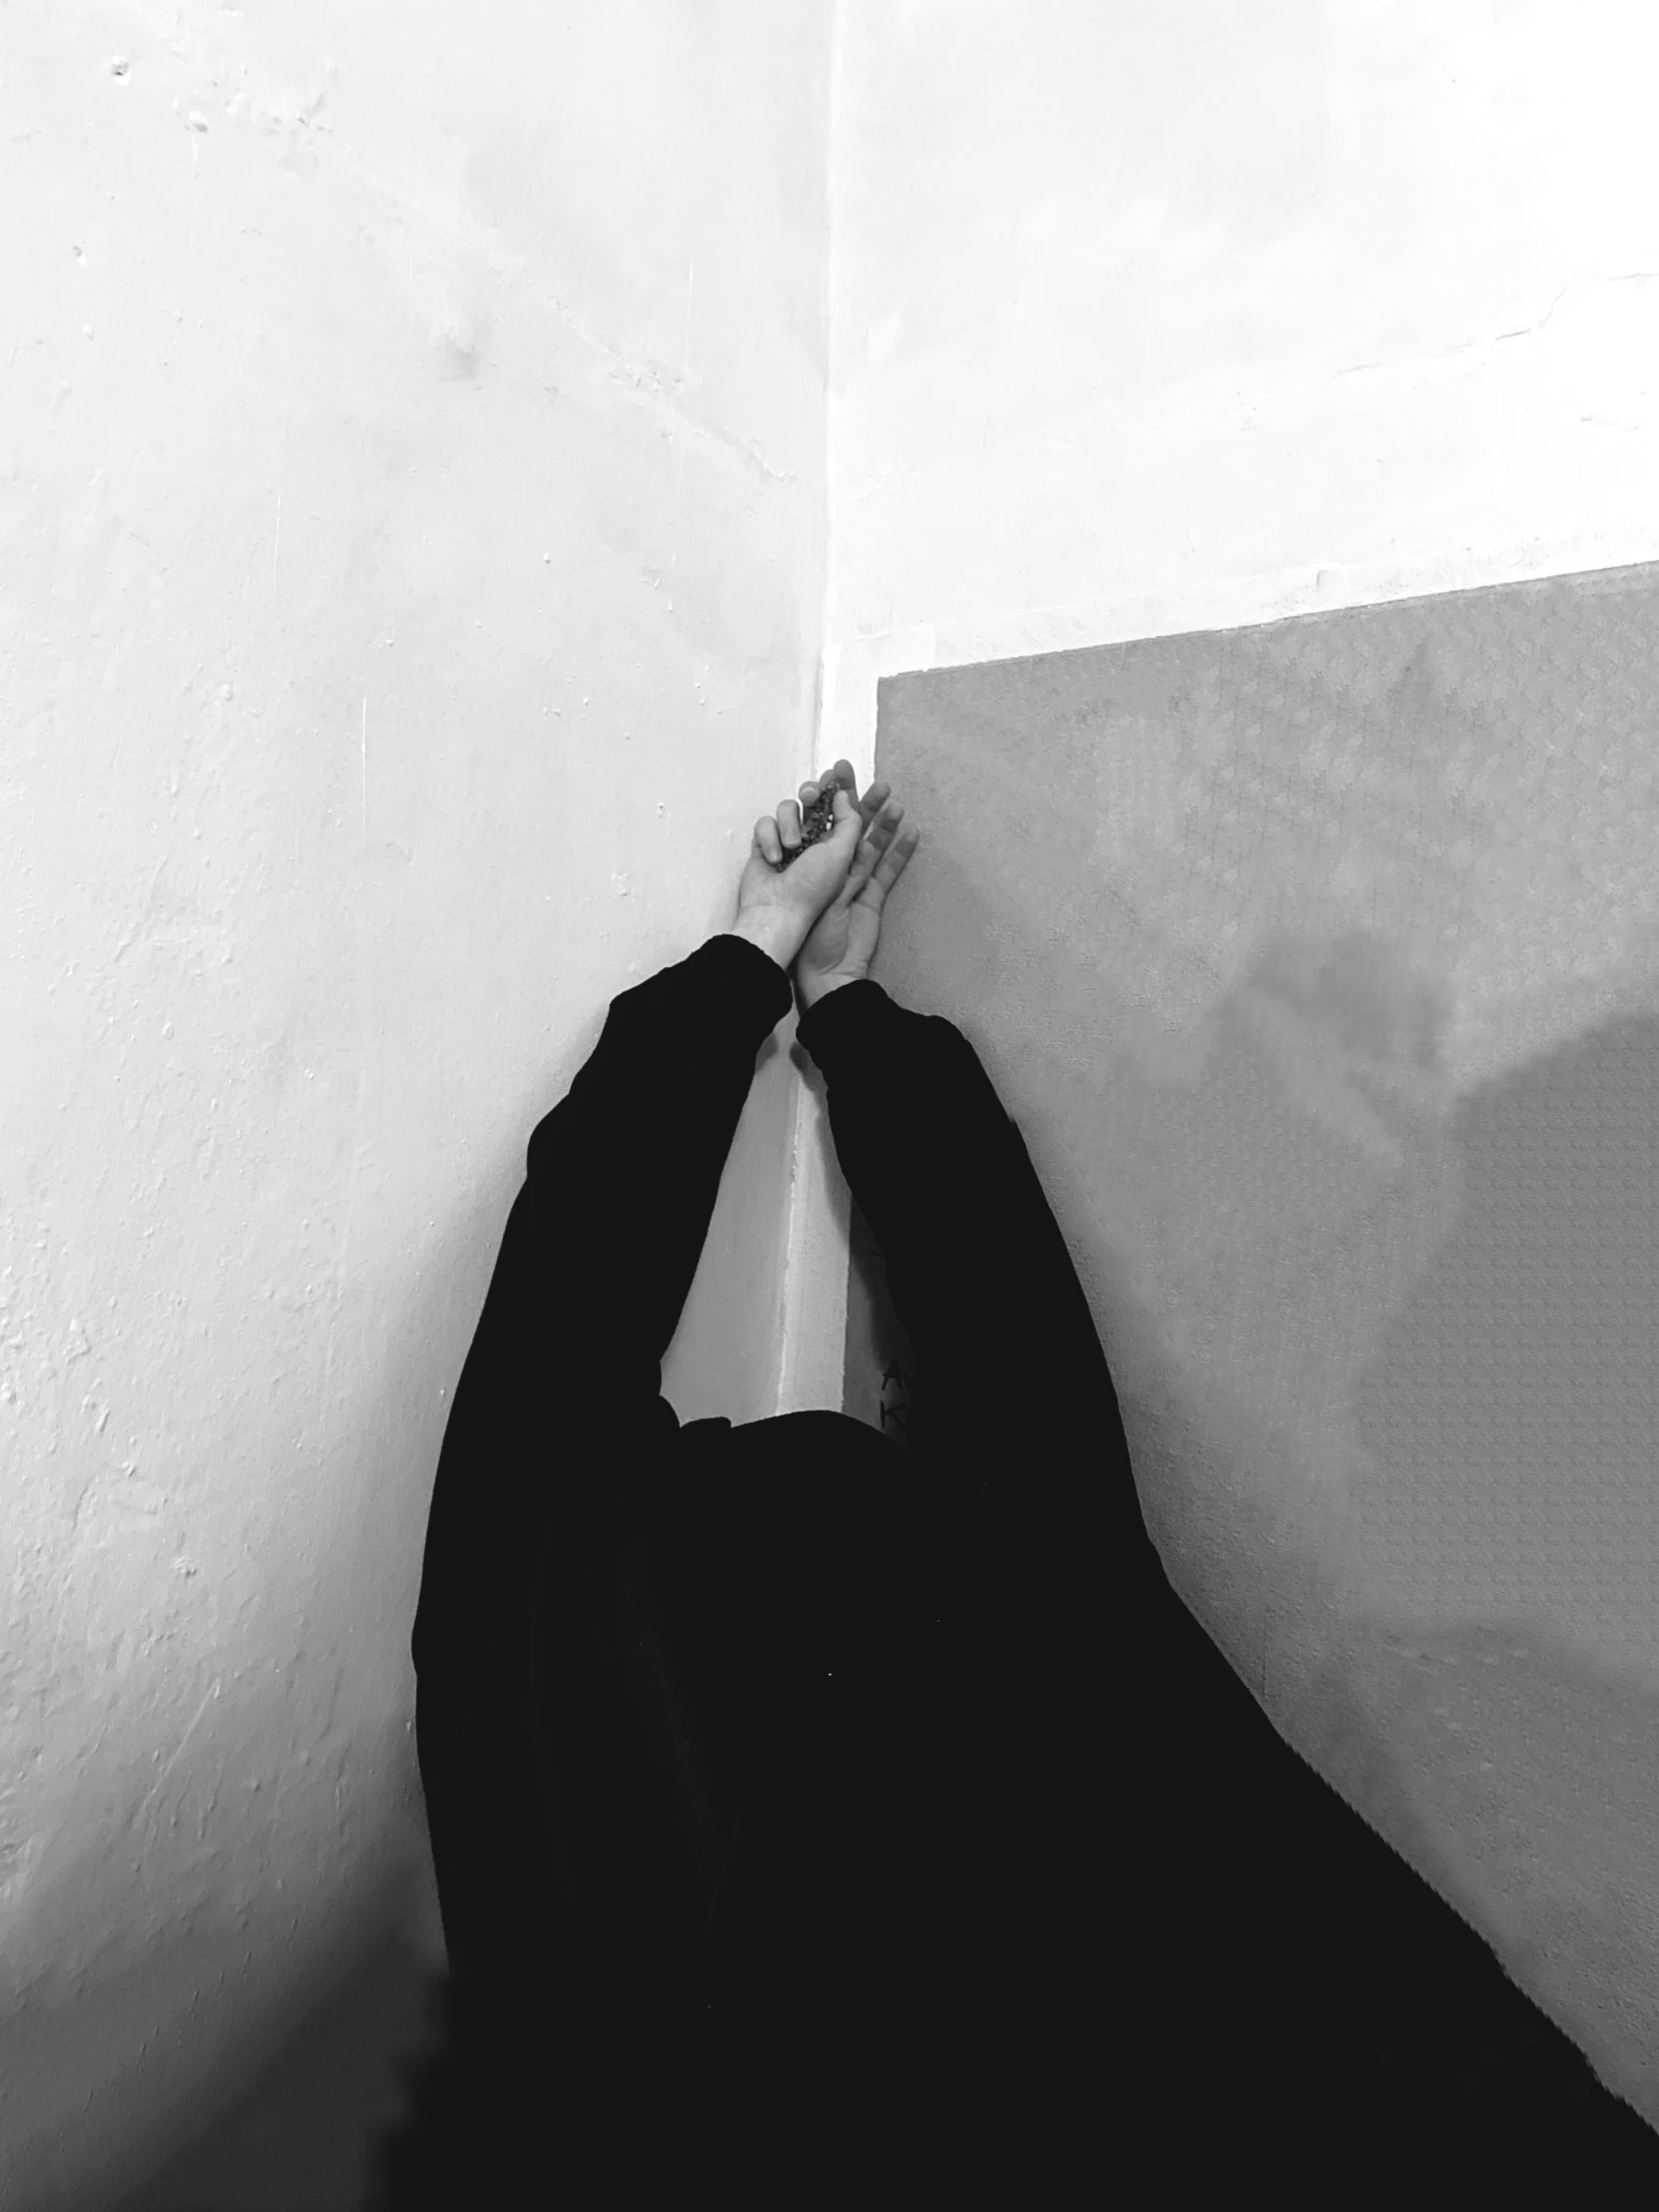 a person with a long black jacket on is holding his hand against the wall